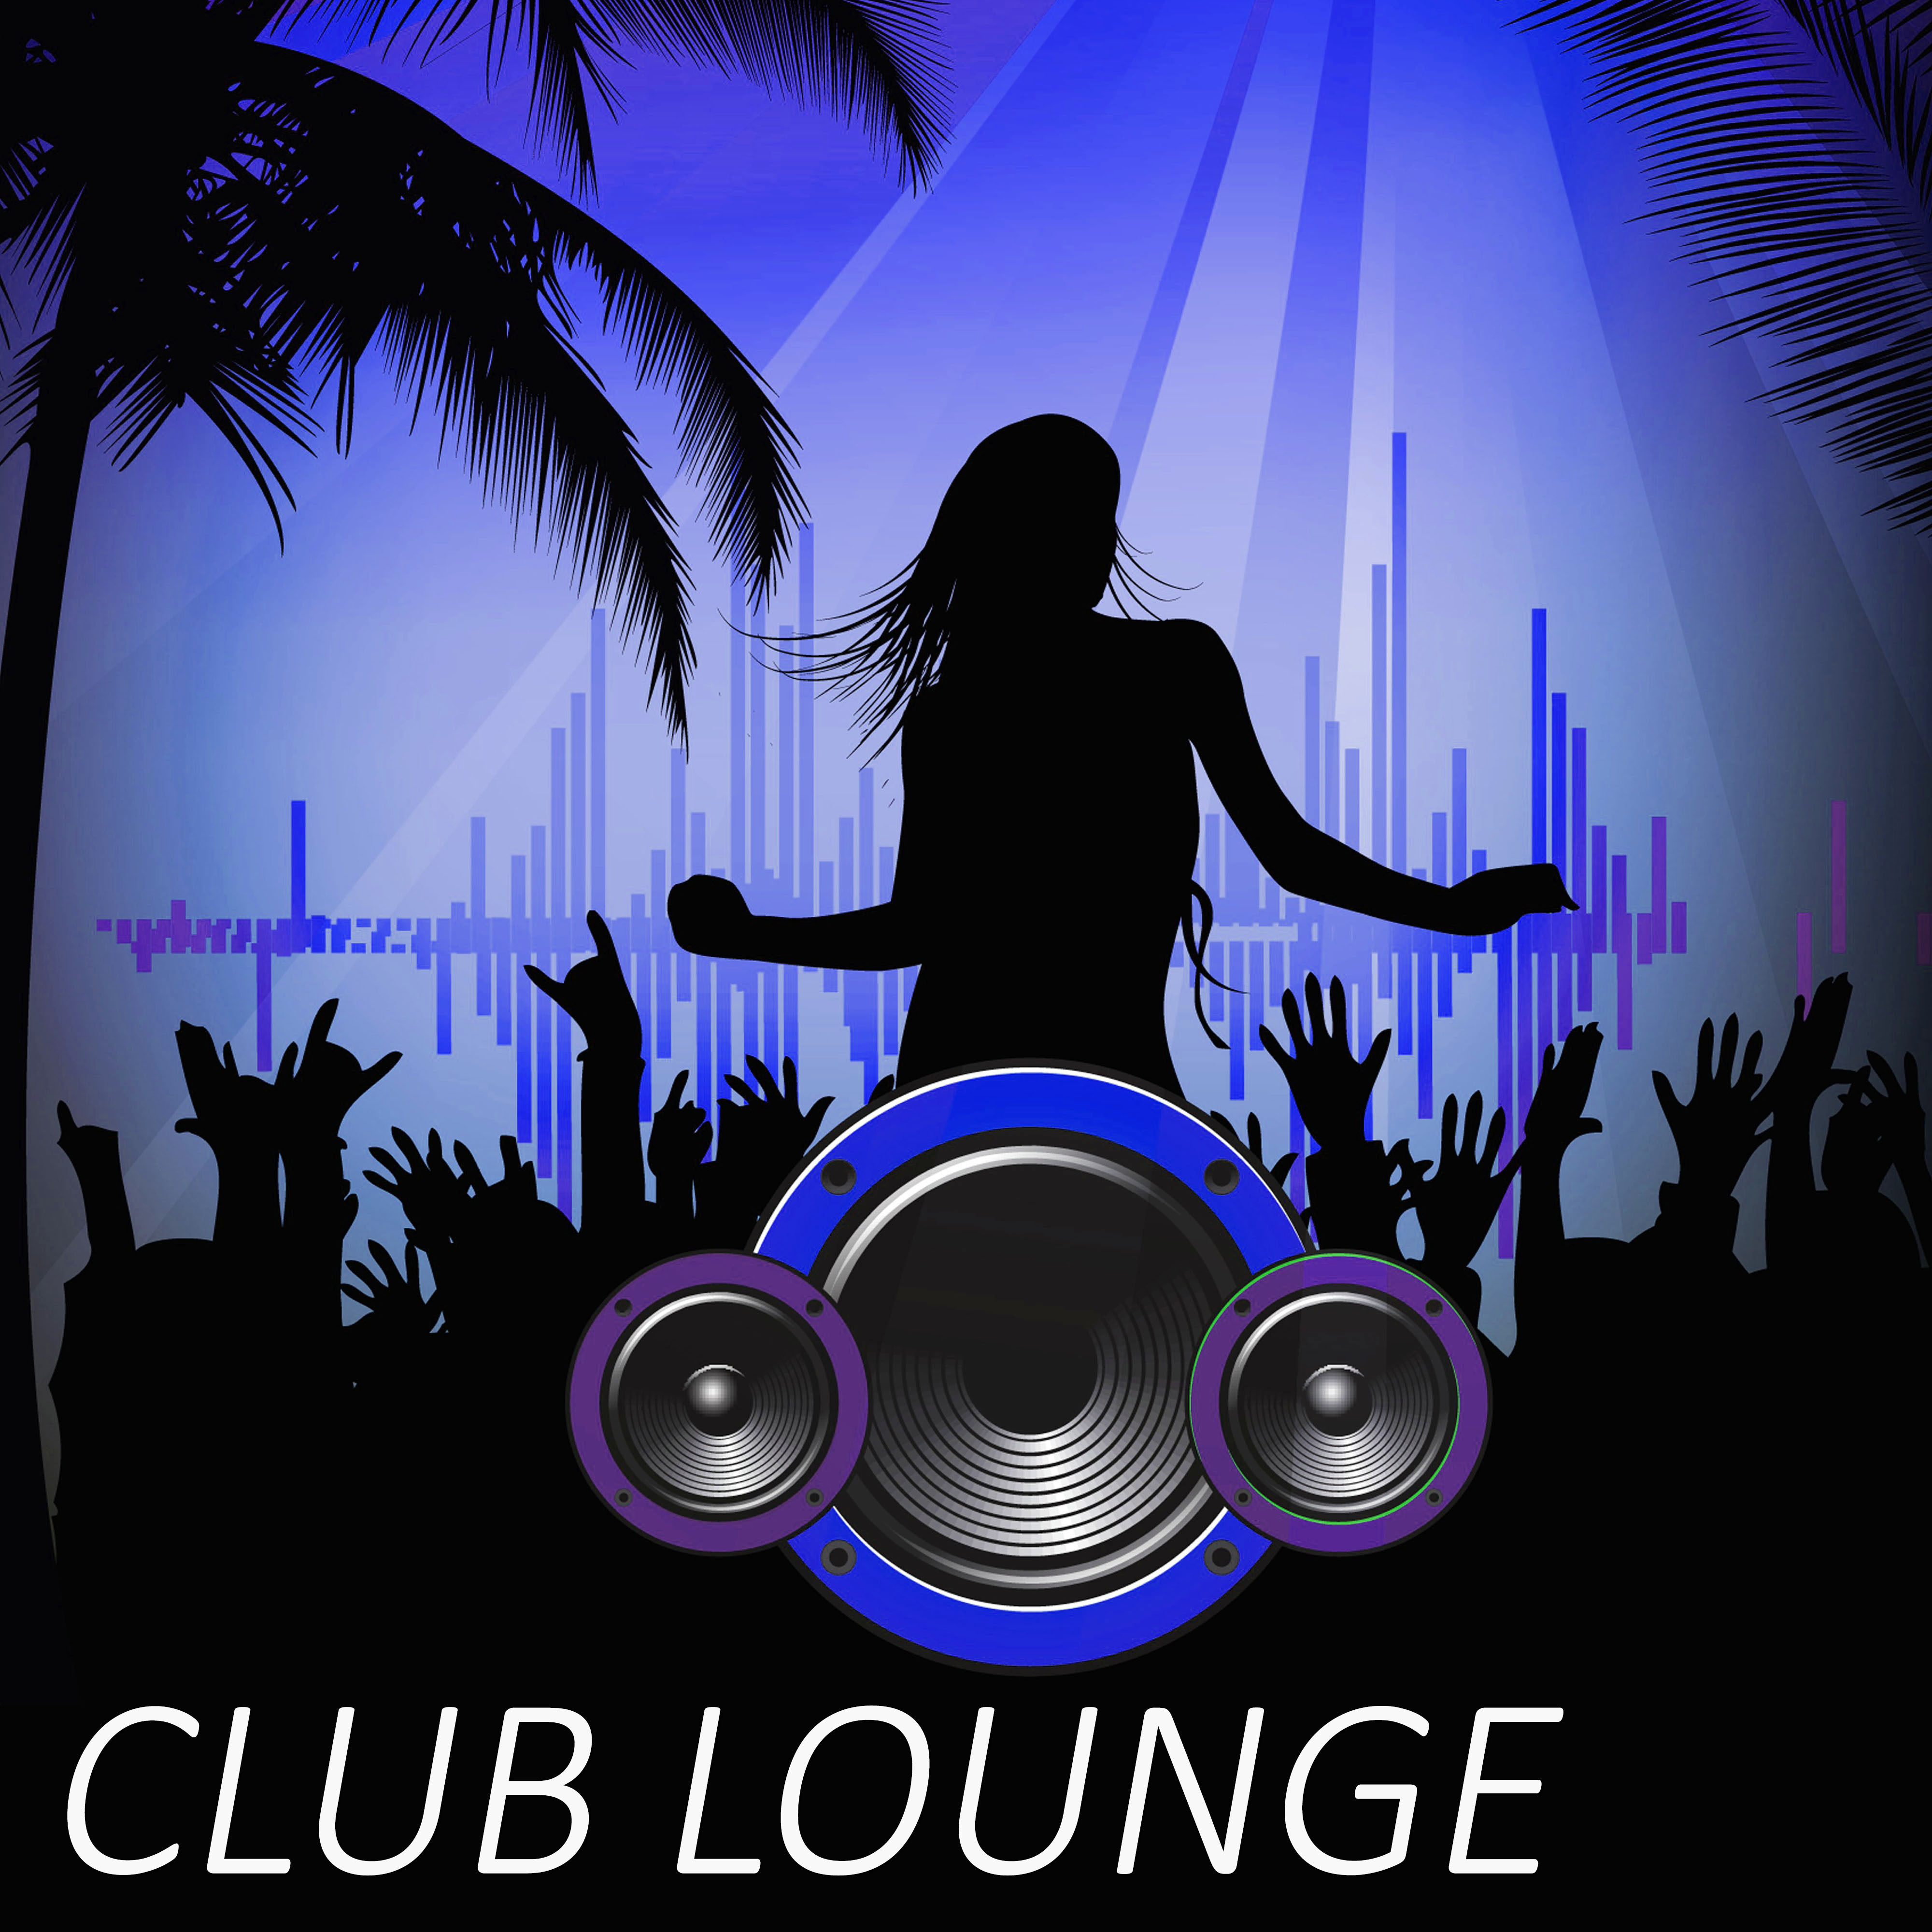 Club Lounge – Best Chill Out Club, Lounged Out